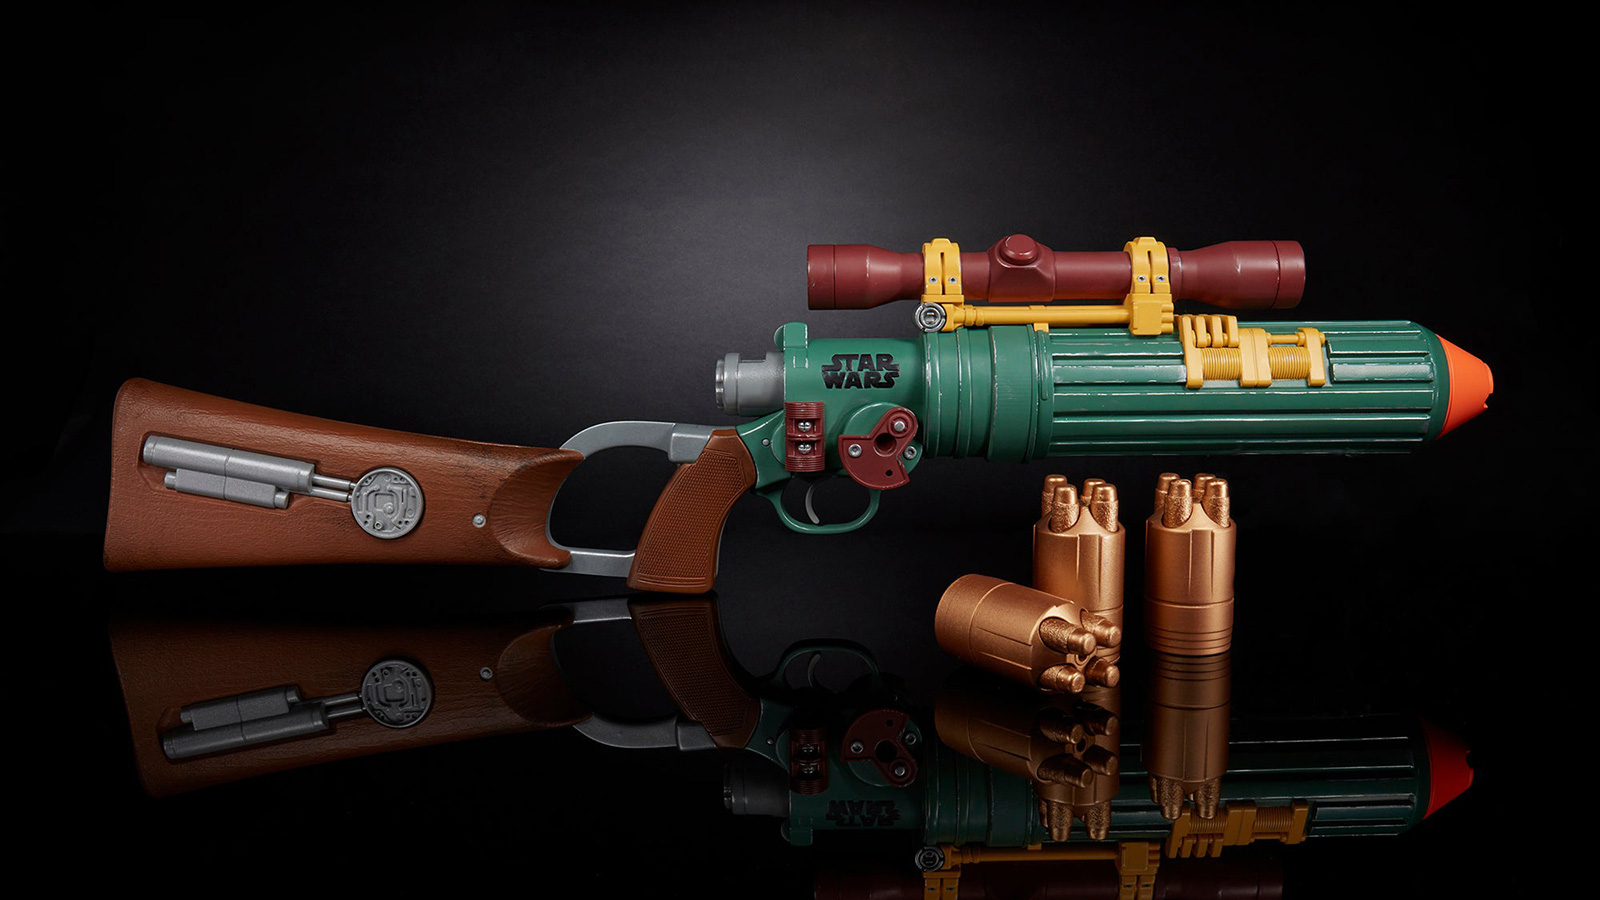 Update - Entertainment Earth Now Offers Free USA Shipping For Nerf LMTD Star Wars Boba Fett's EE-3 Blaster